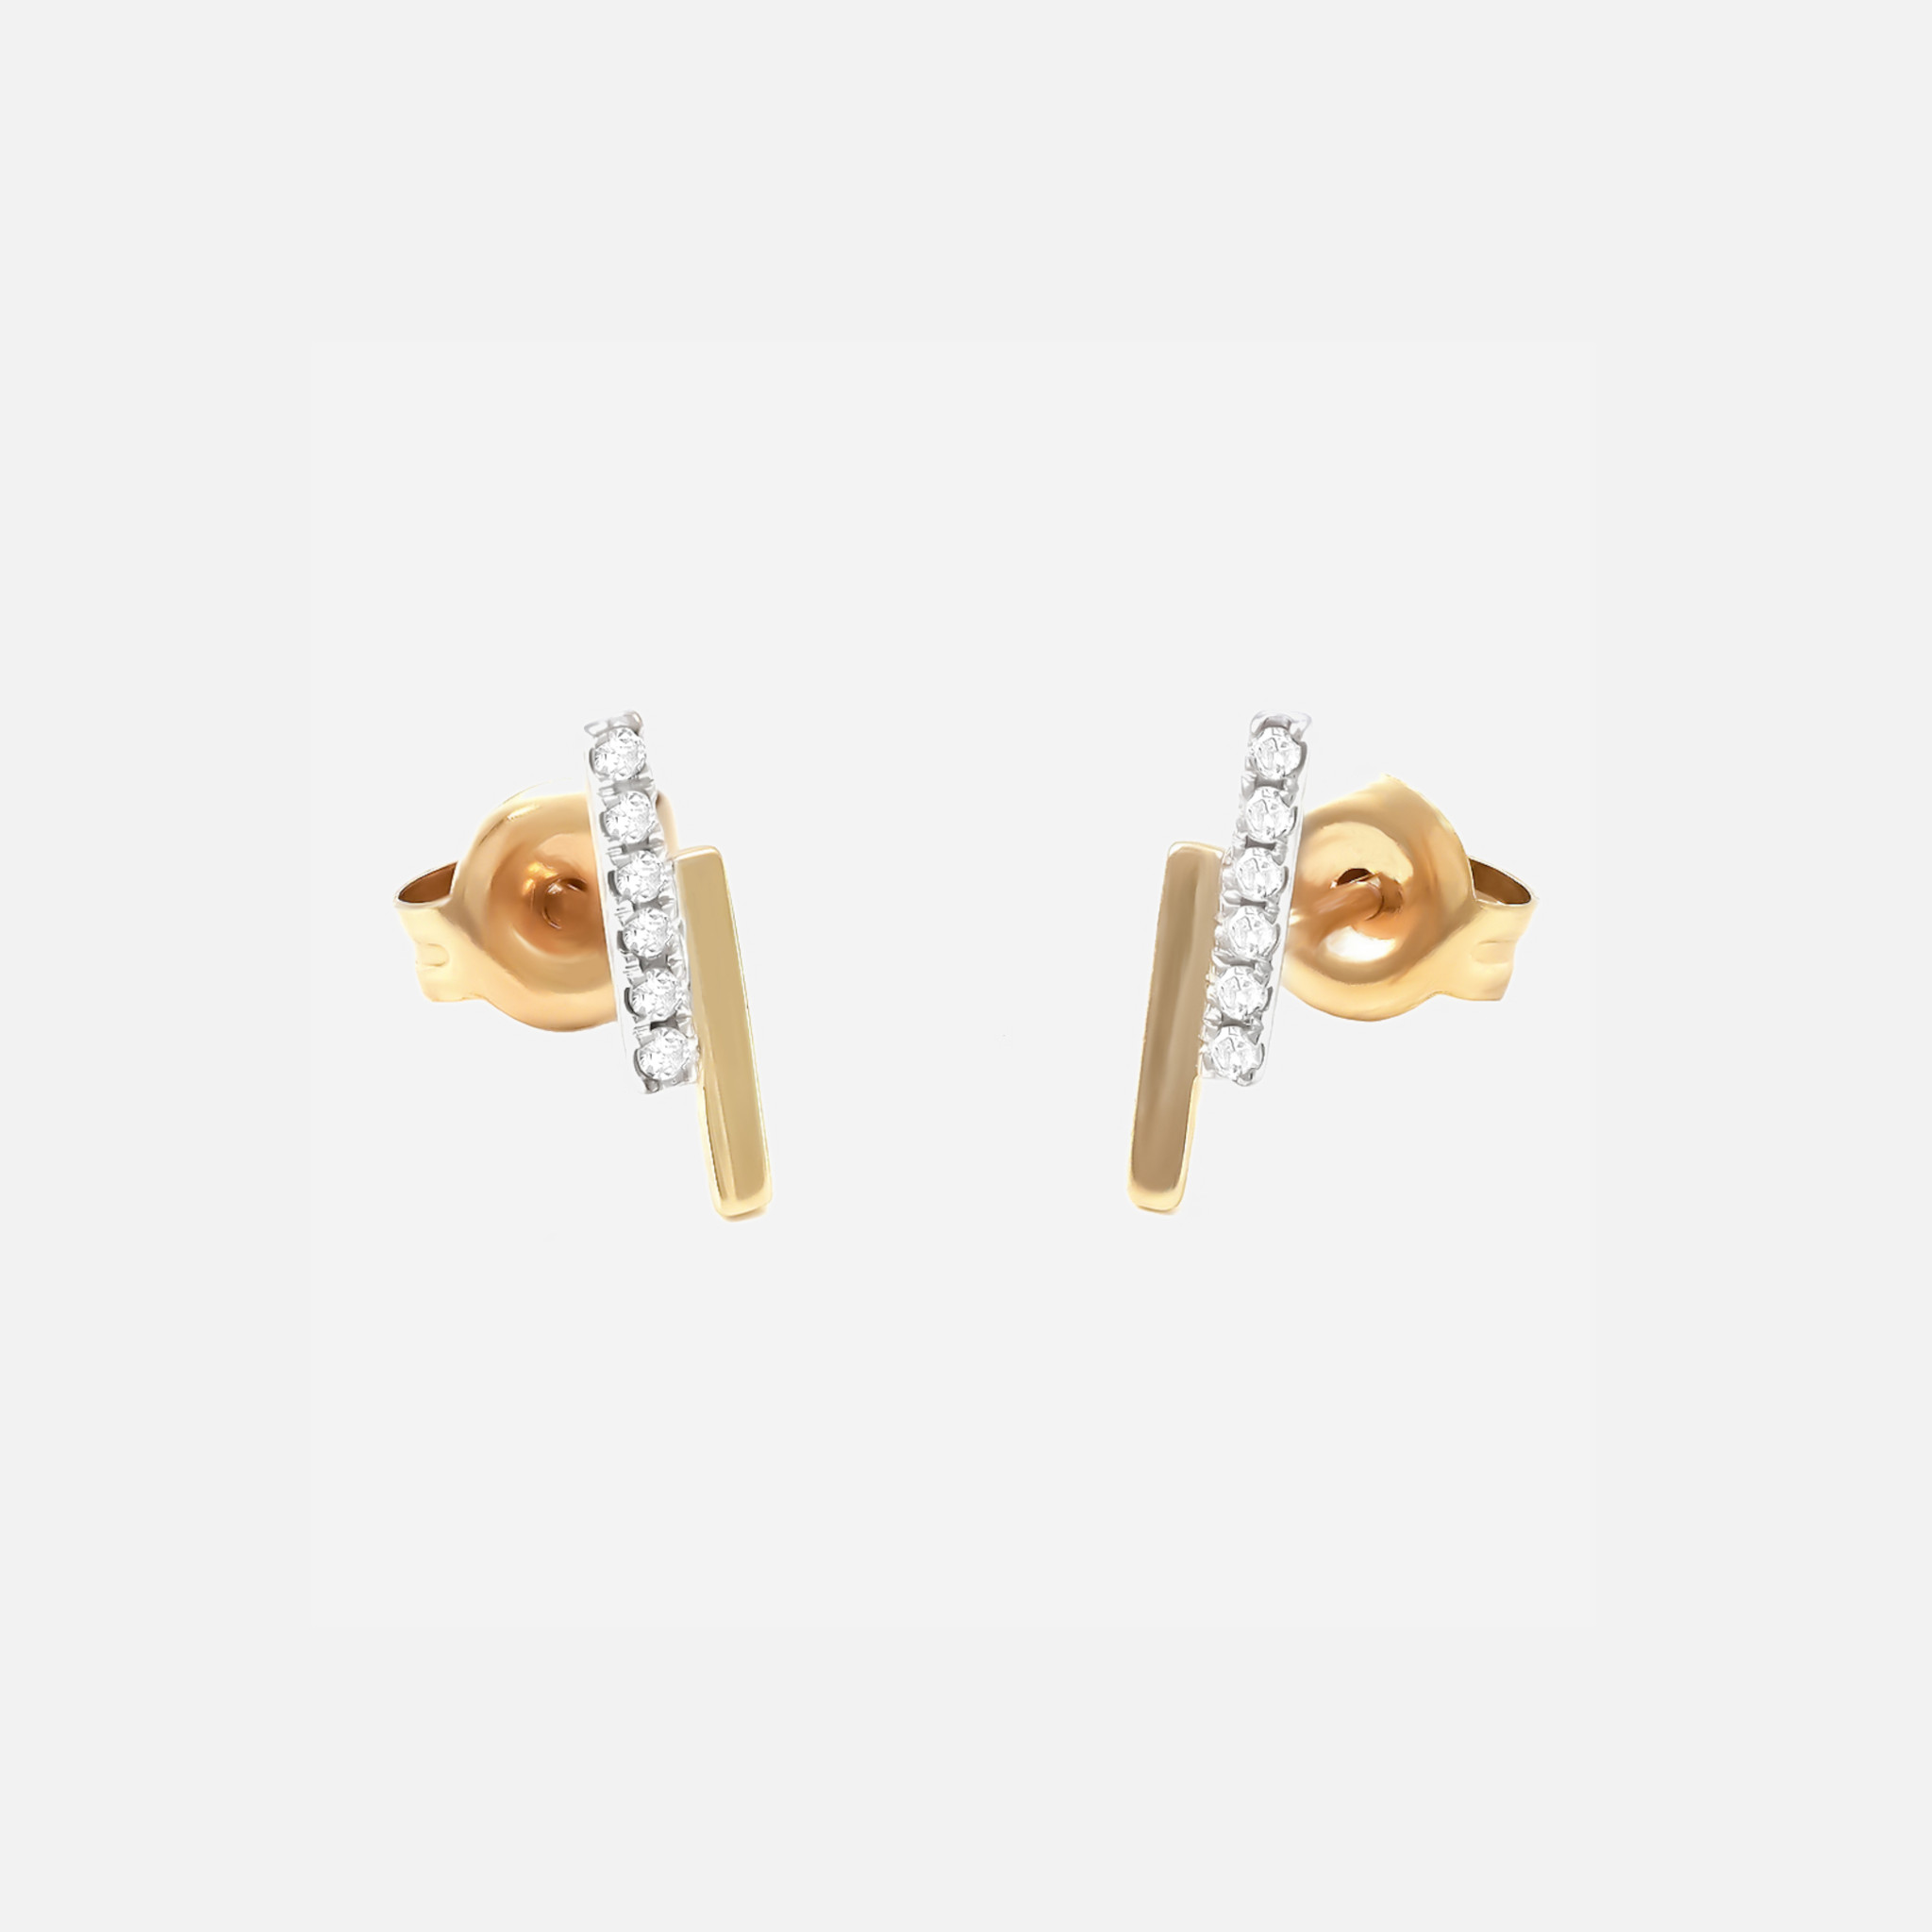 These diamond bar earrings achieve a harmonious blend of structure and shine, meticulously crafted from 14k gold.